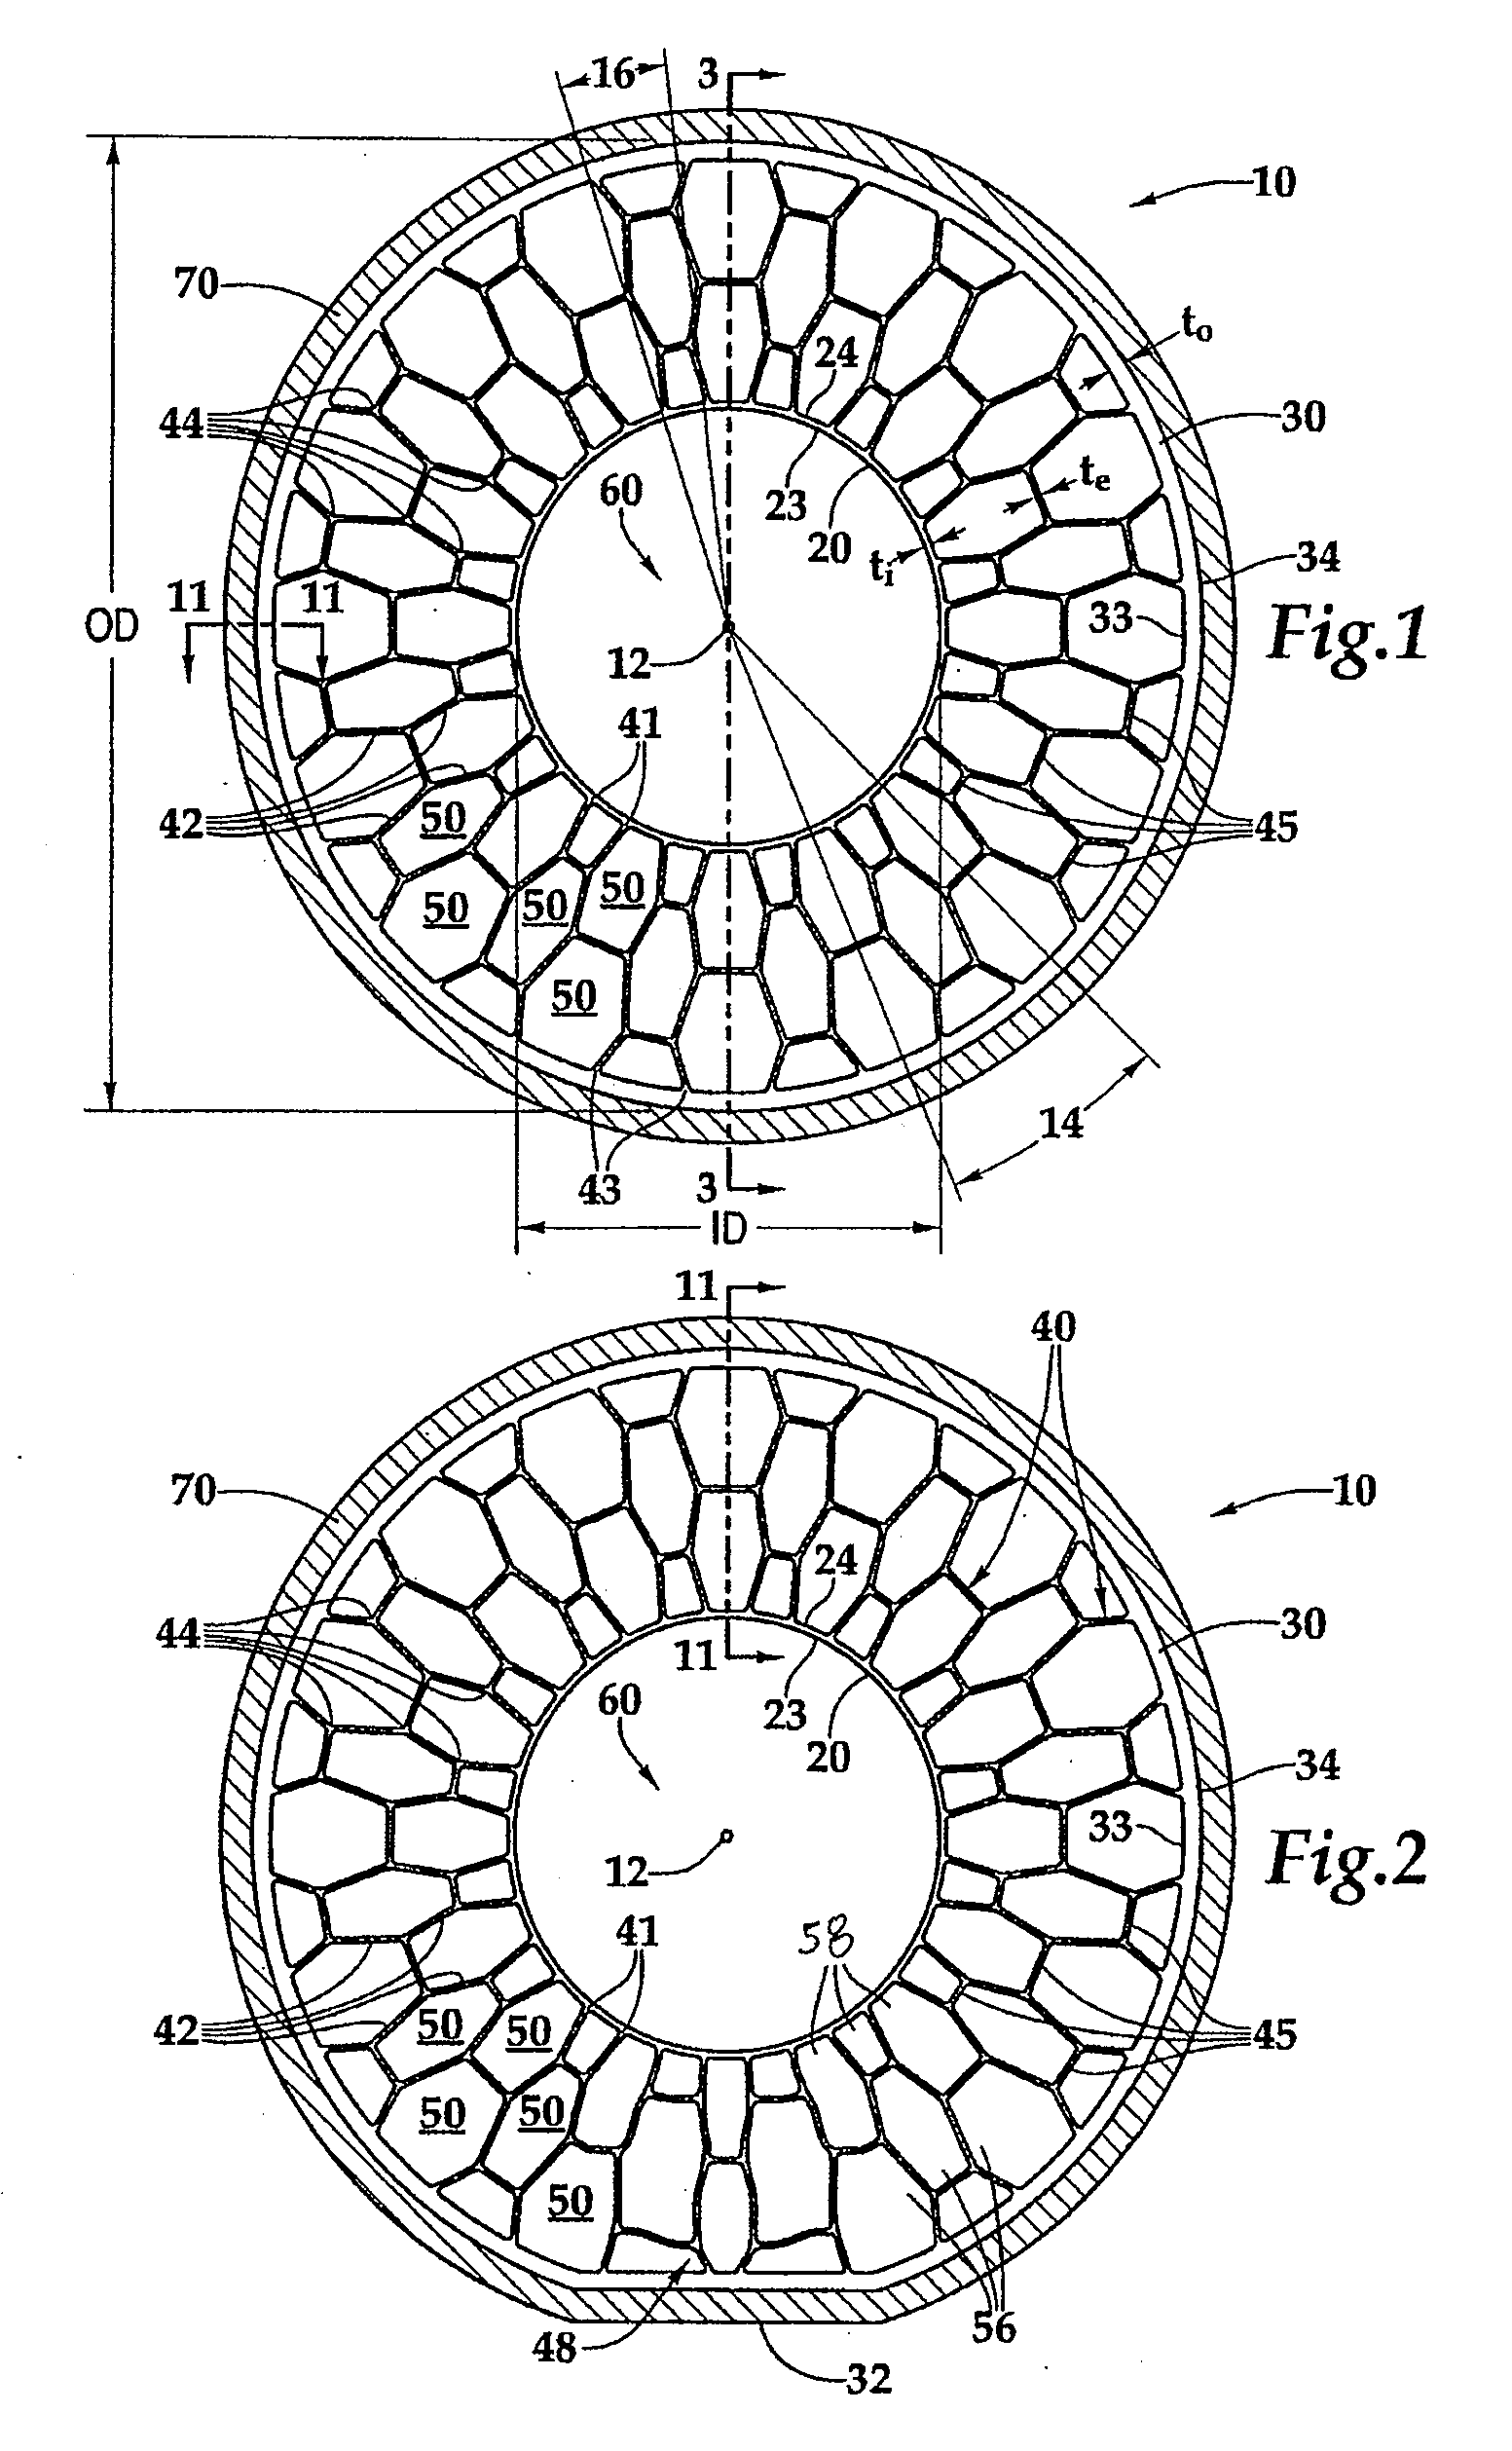 Tension-based non-pneumatic tire